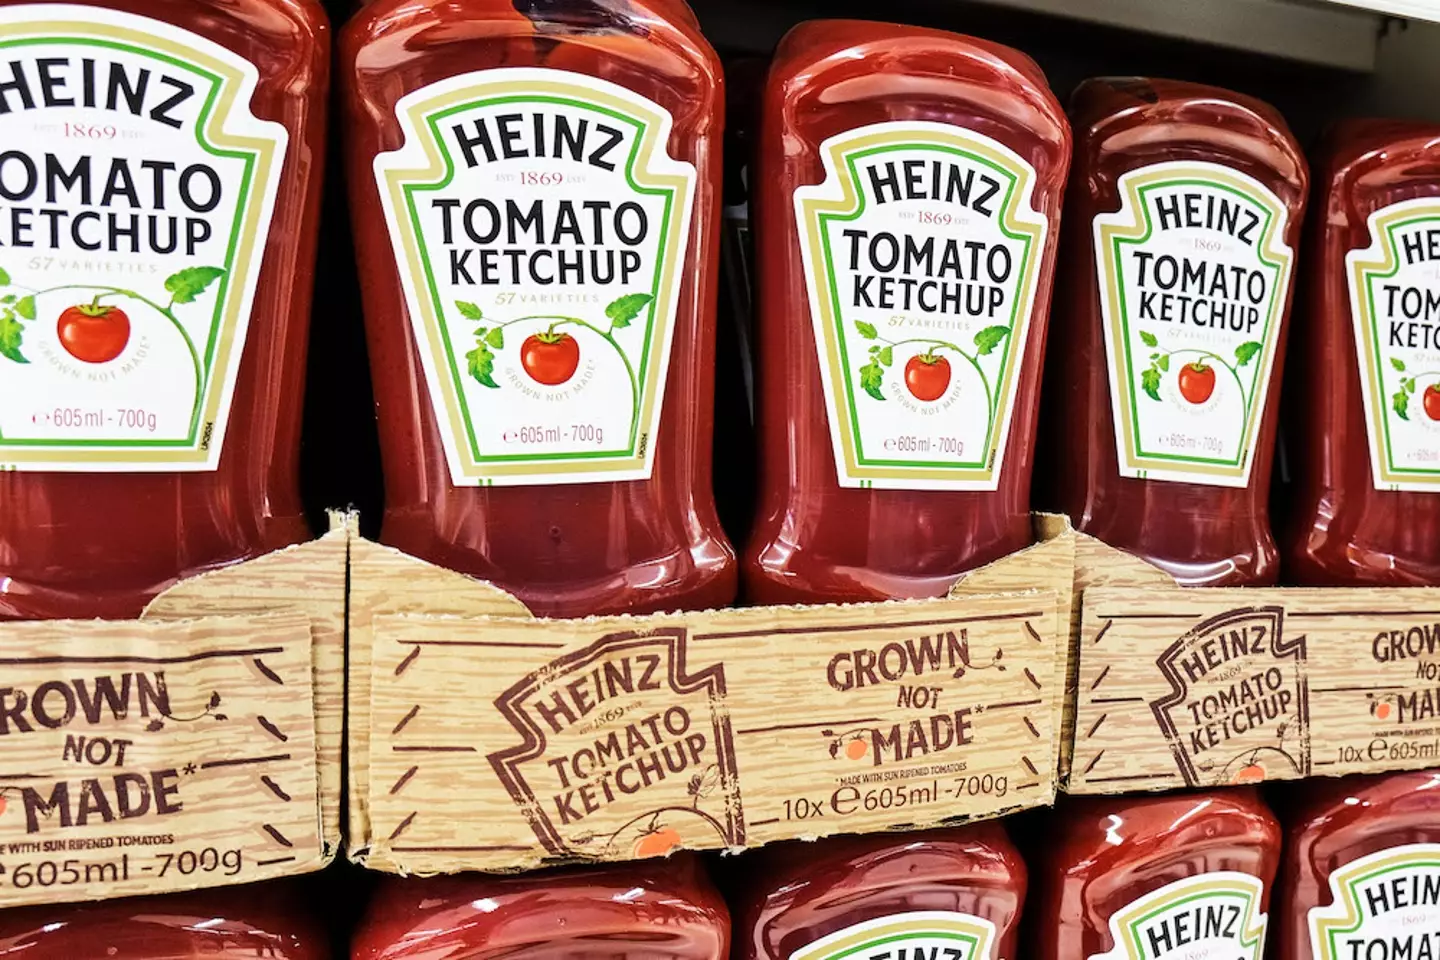 Tesco and Heinz have had a disagreement over pricing.